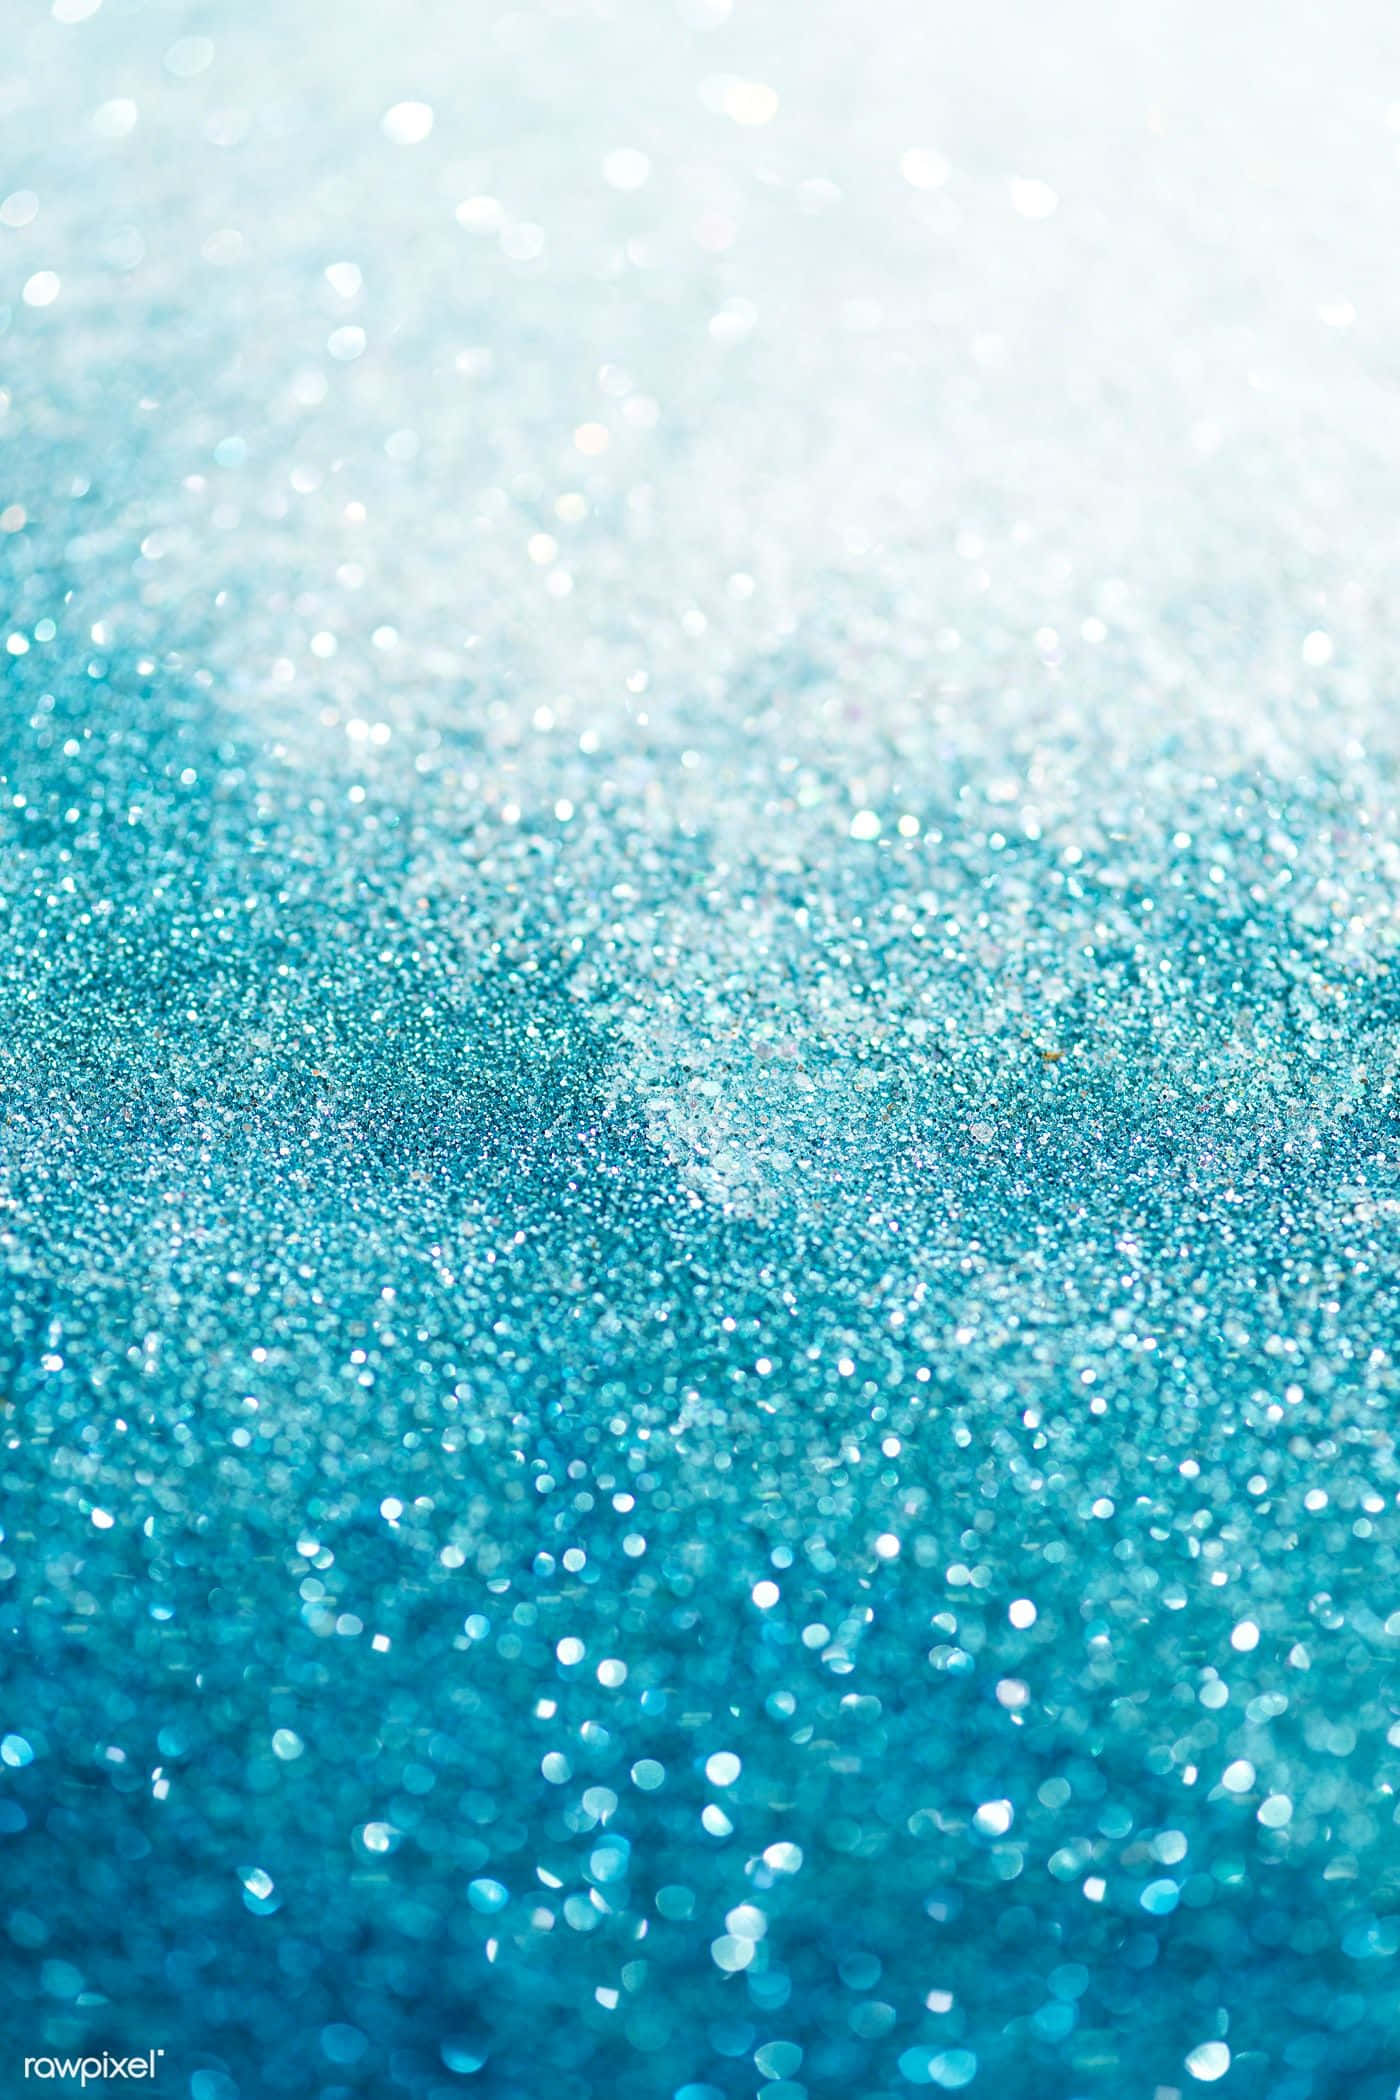 Beautifully Textured Teal Glitter Background